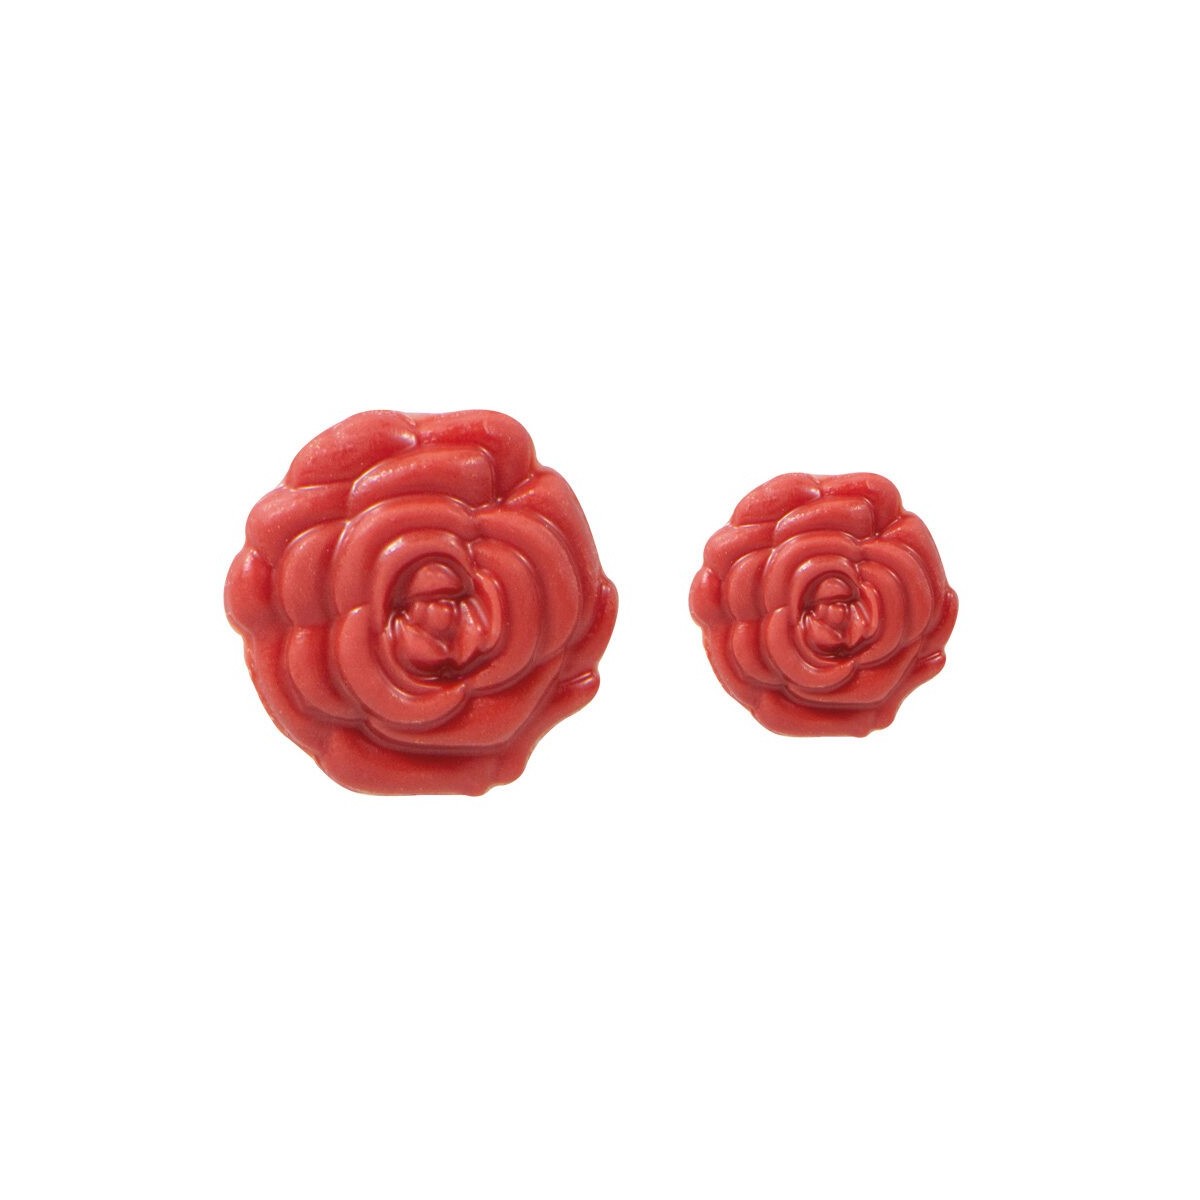 78247  ASS ROSES ROUGE 128PCES S/CDE